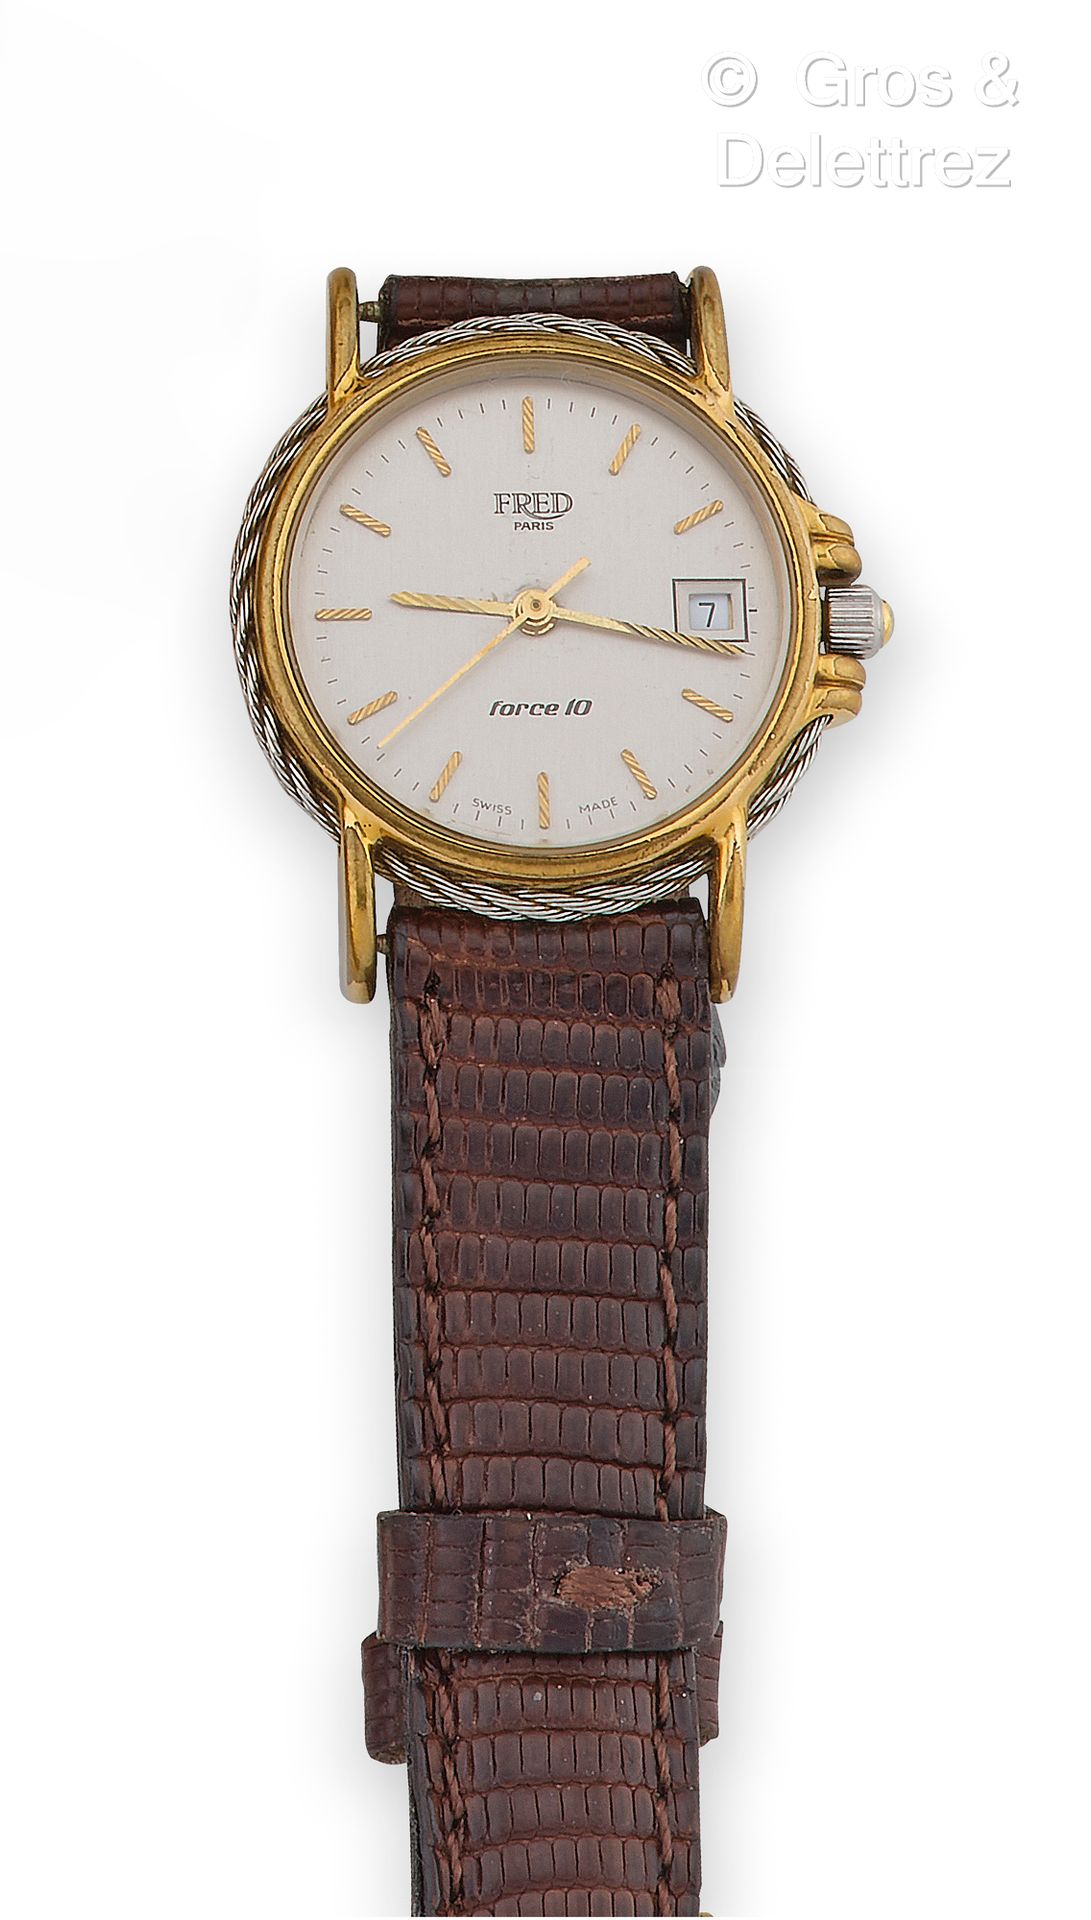 NON VENUE - FRED "Force 10" - Wrist watch in steel and gold-plated steel, round &hellip;